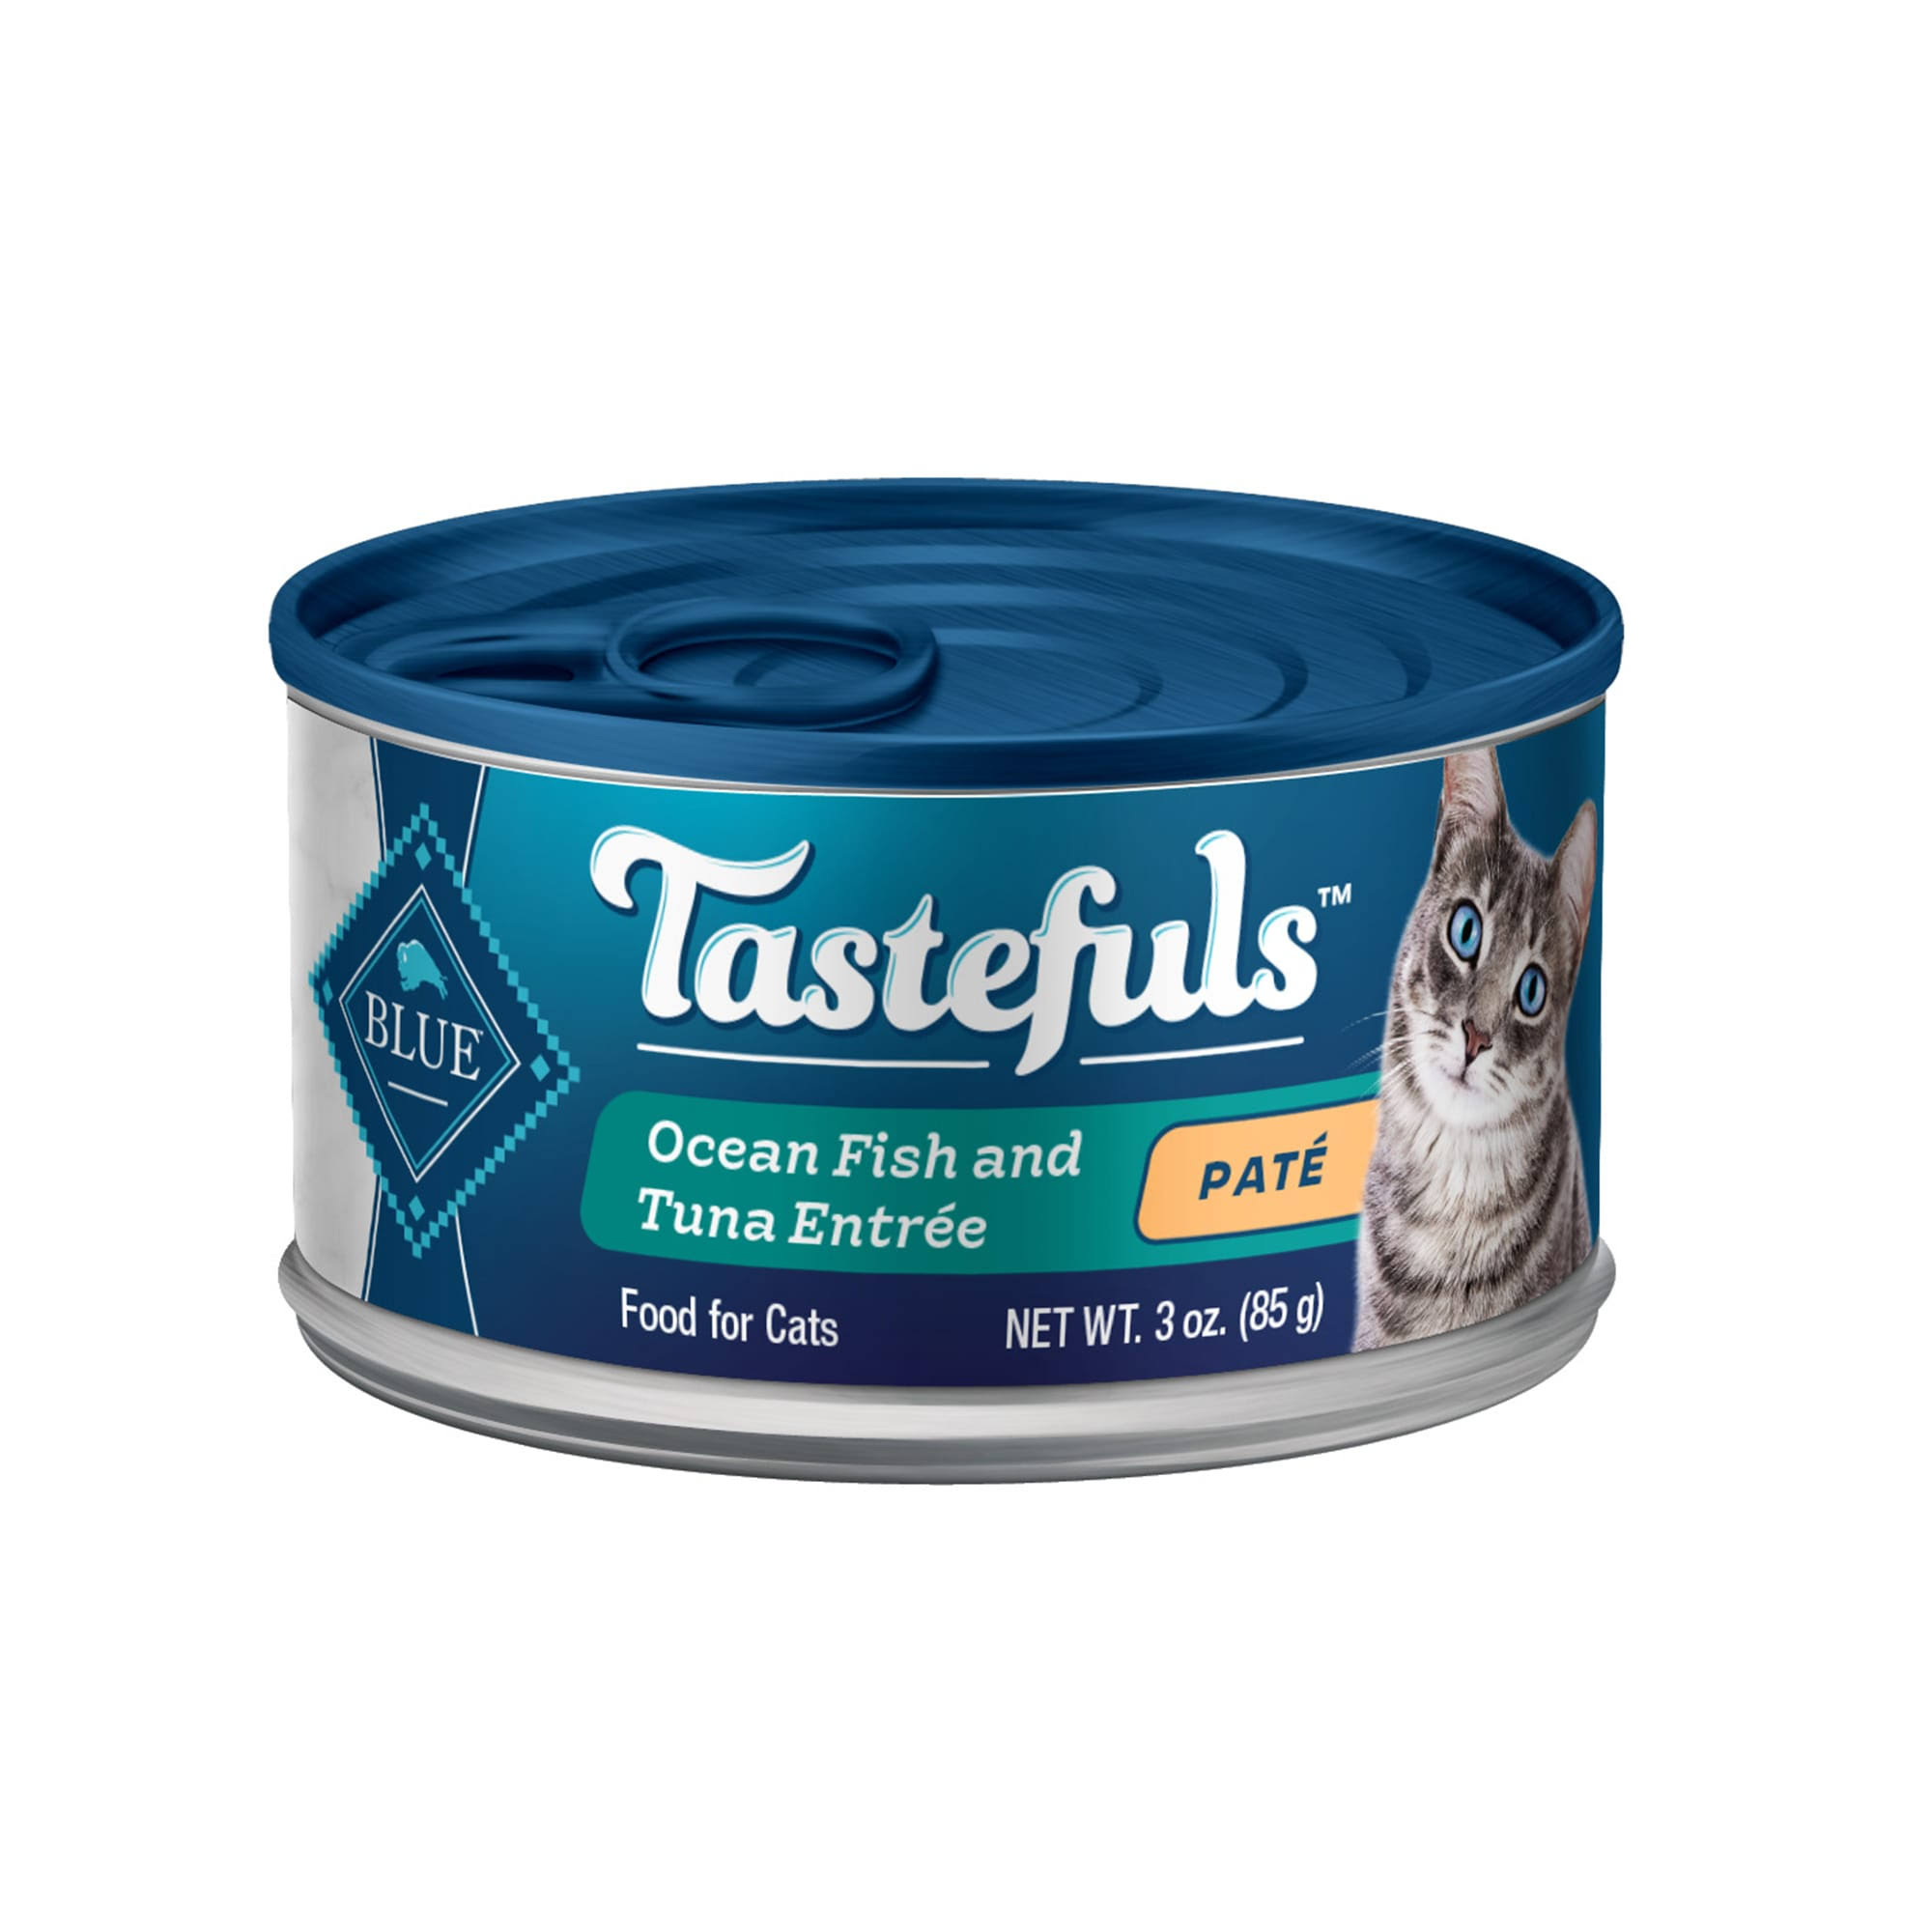 Blue Buffalo Blue Tastefuls Food For Cats, Ocean Fish and Tuna Entree, Pate, Adult - 3 oz